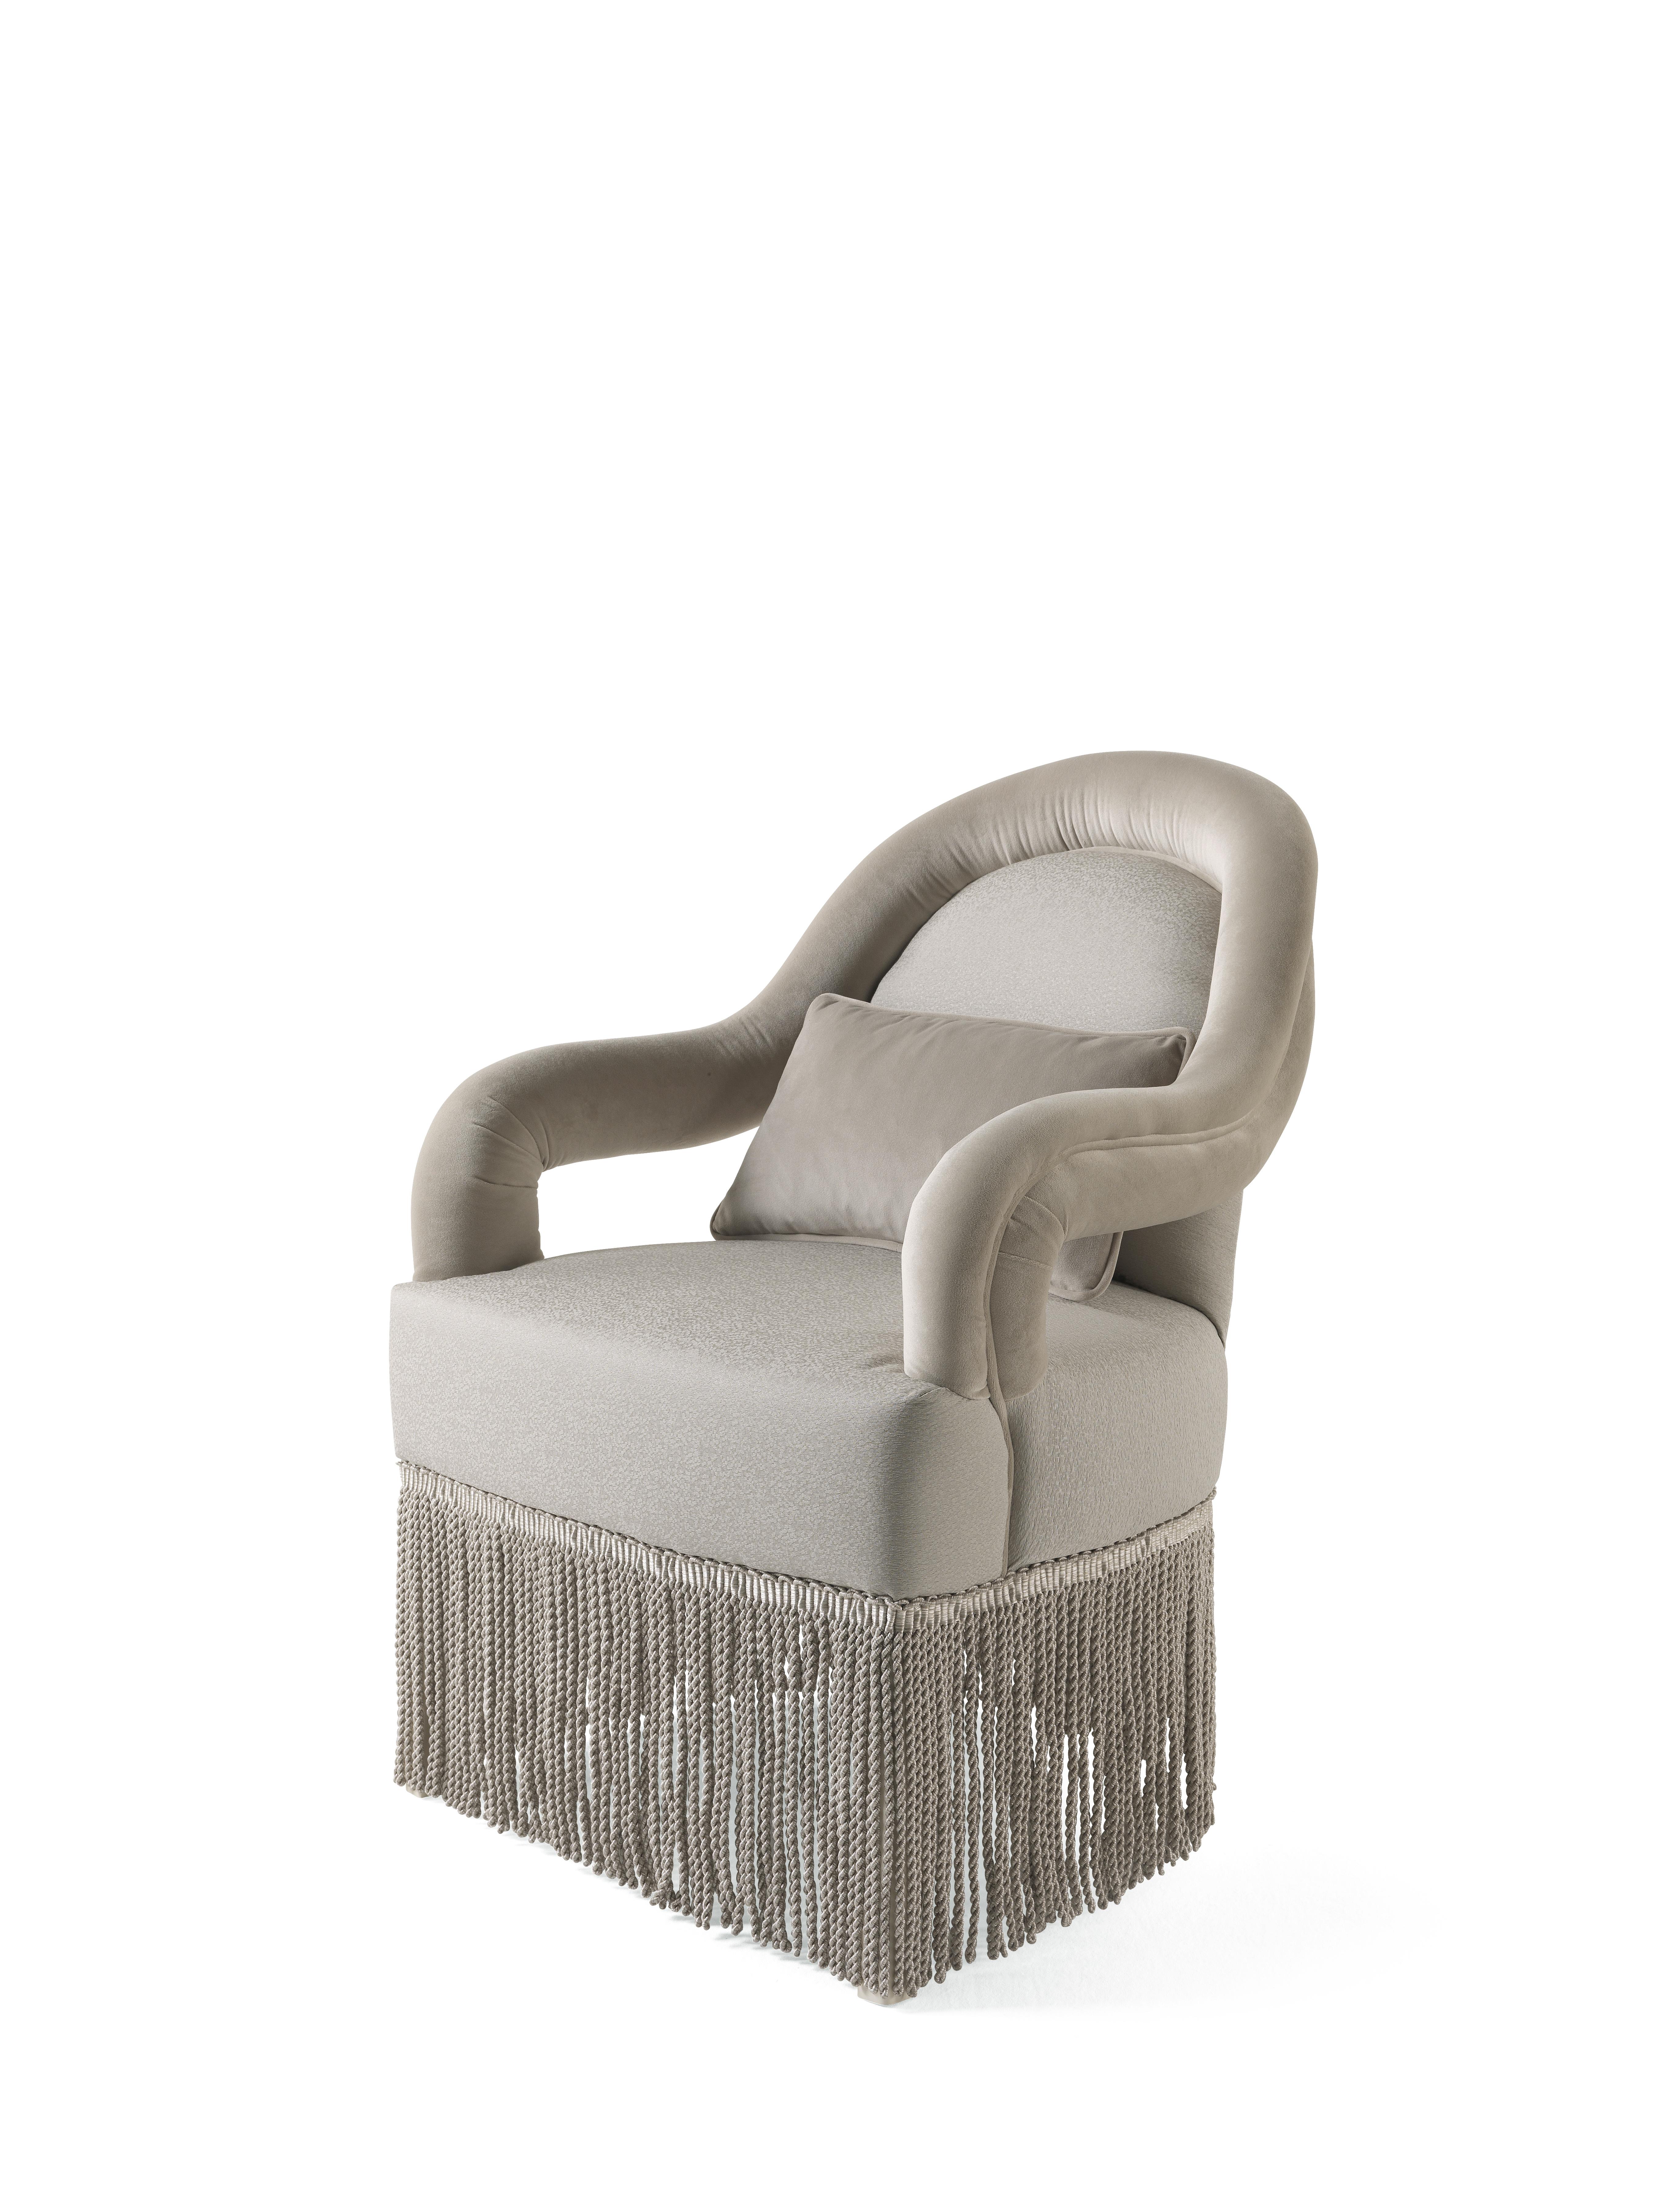 Soft lines and timeless design for the Pegaso line. The seats are characterized by a lateral opening which gives the furniture a special lightness. The fringes add a decorative note that enhances the sophisticated atmosphere that is typical of Jumbo